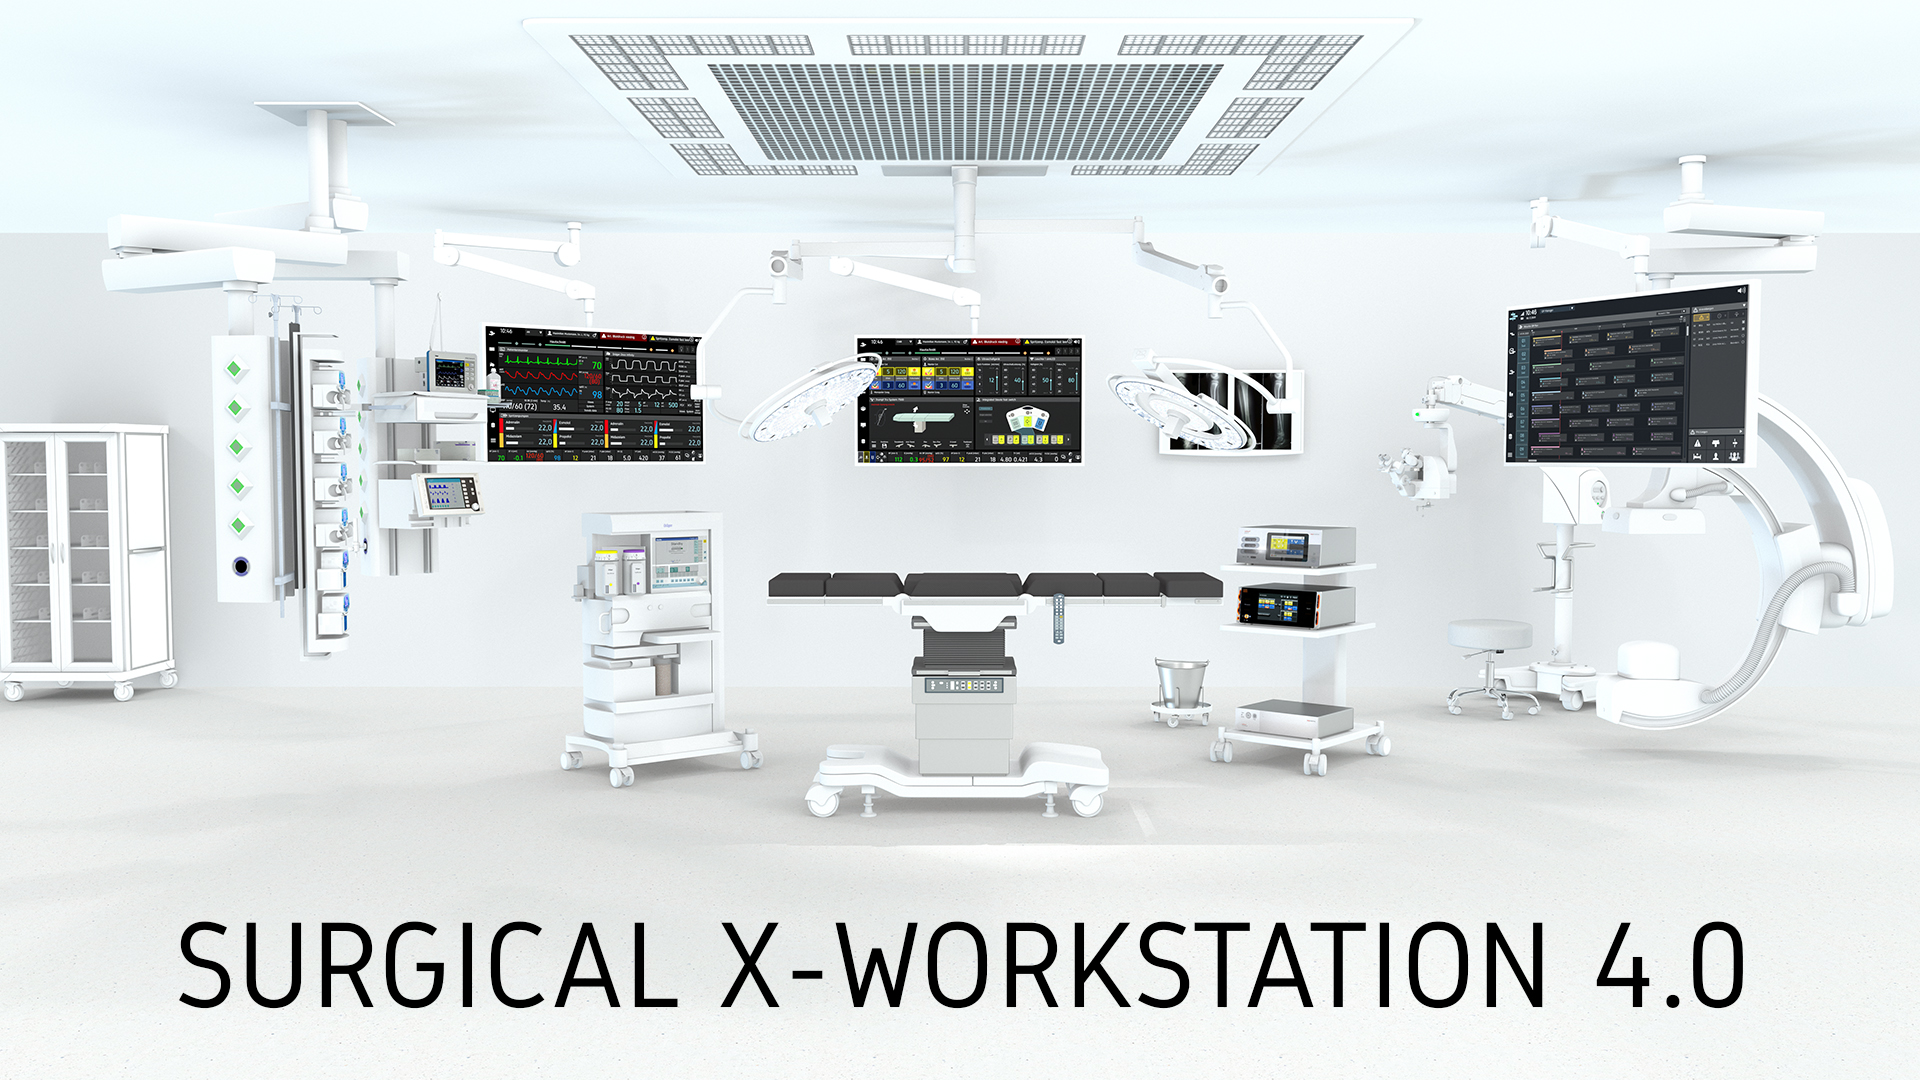 Surgical X-Workstation 4.0